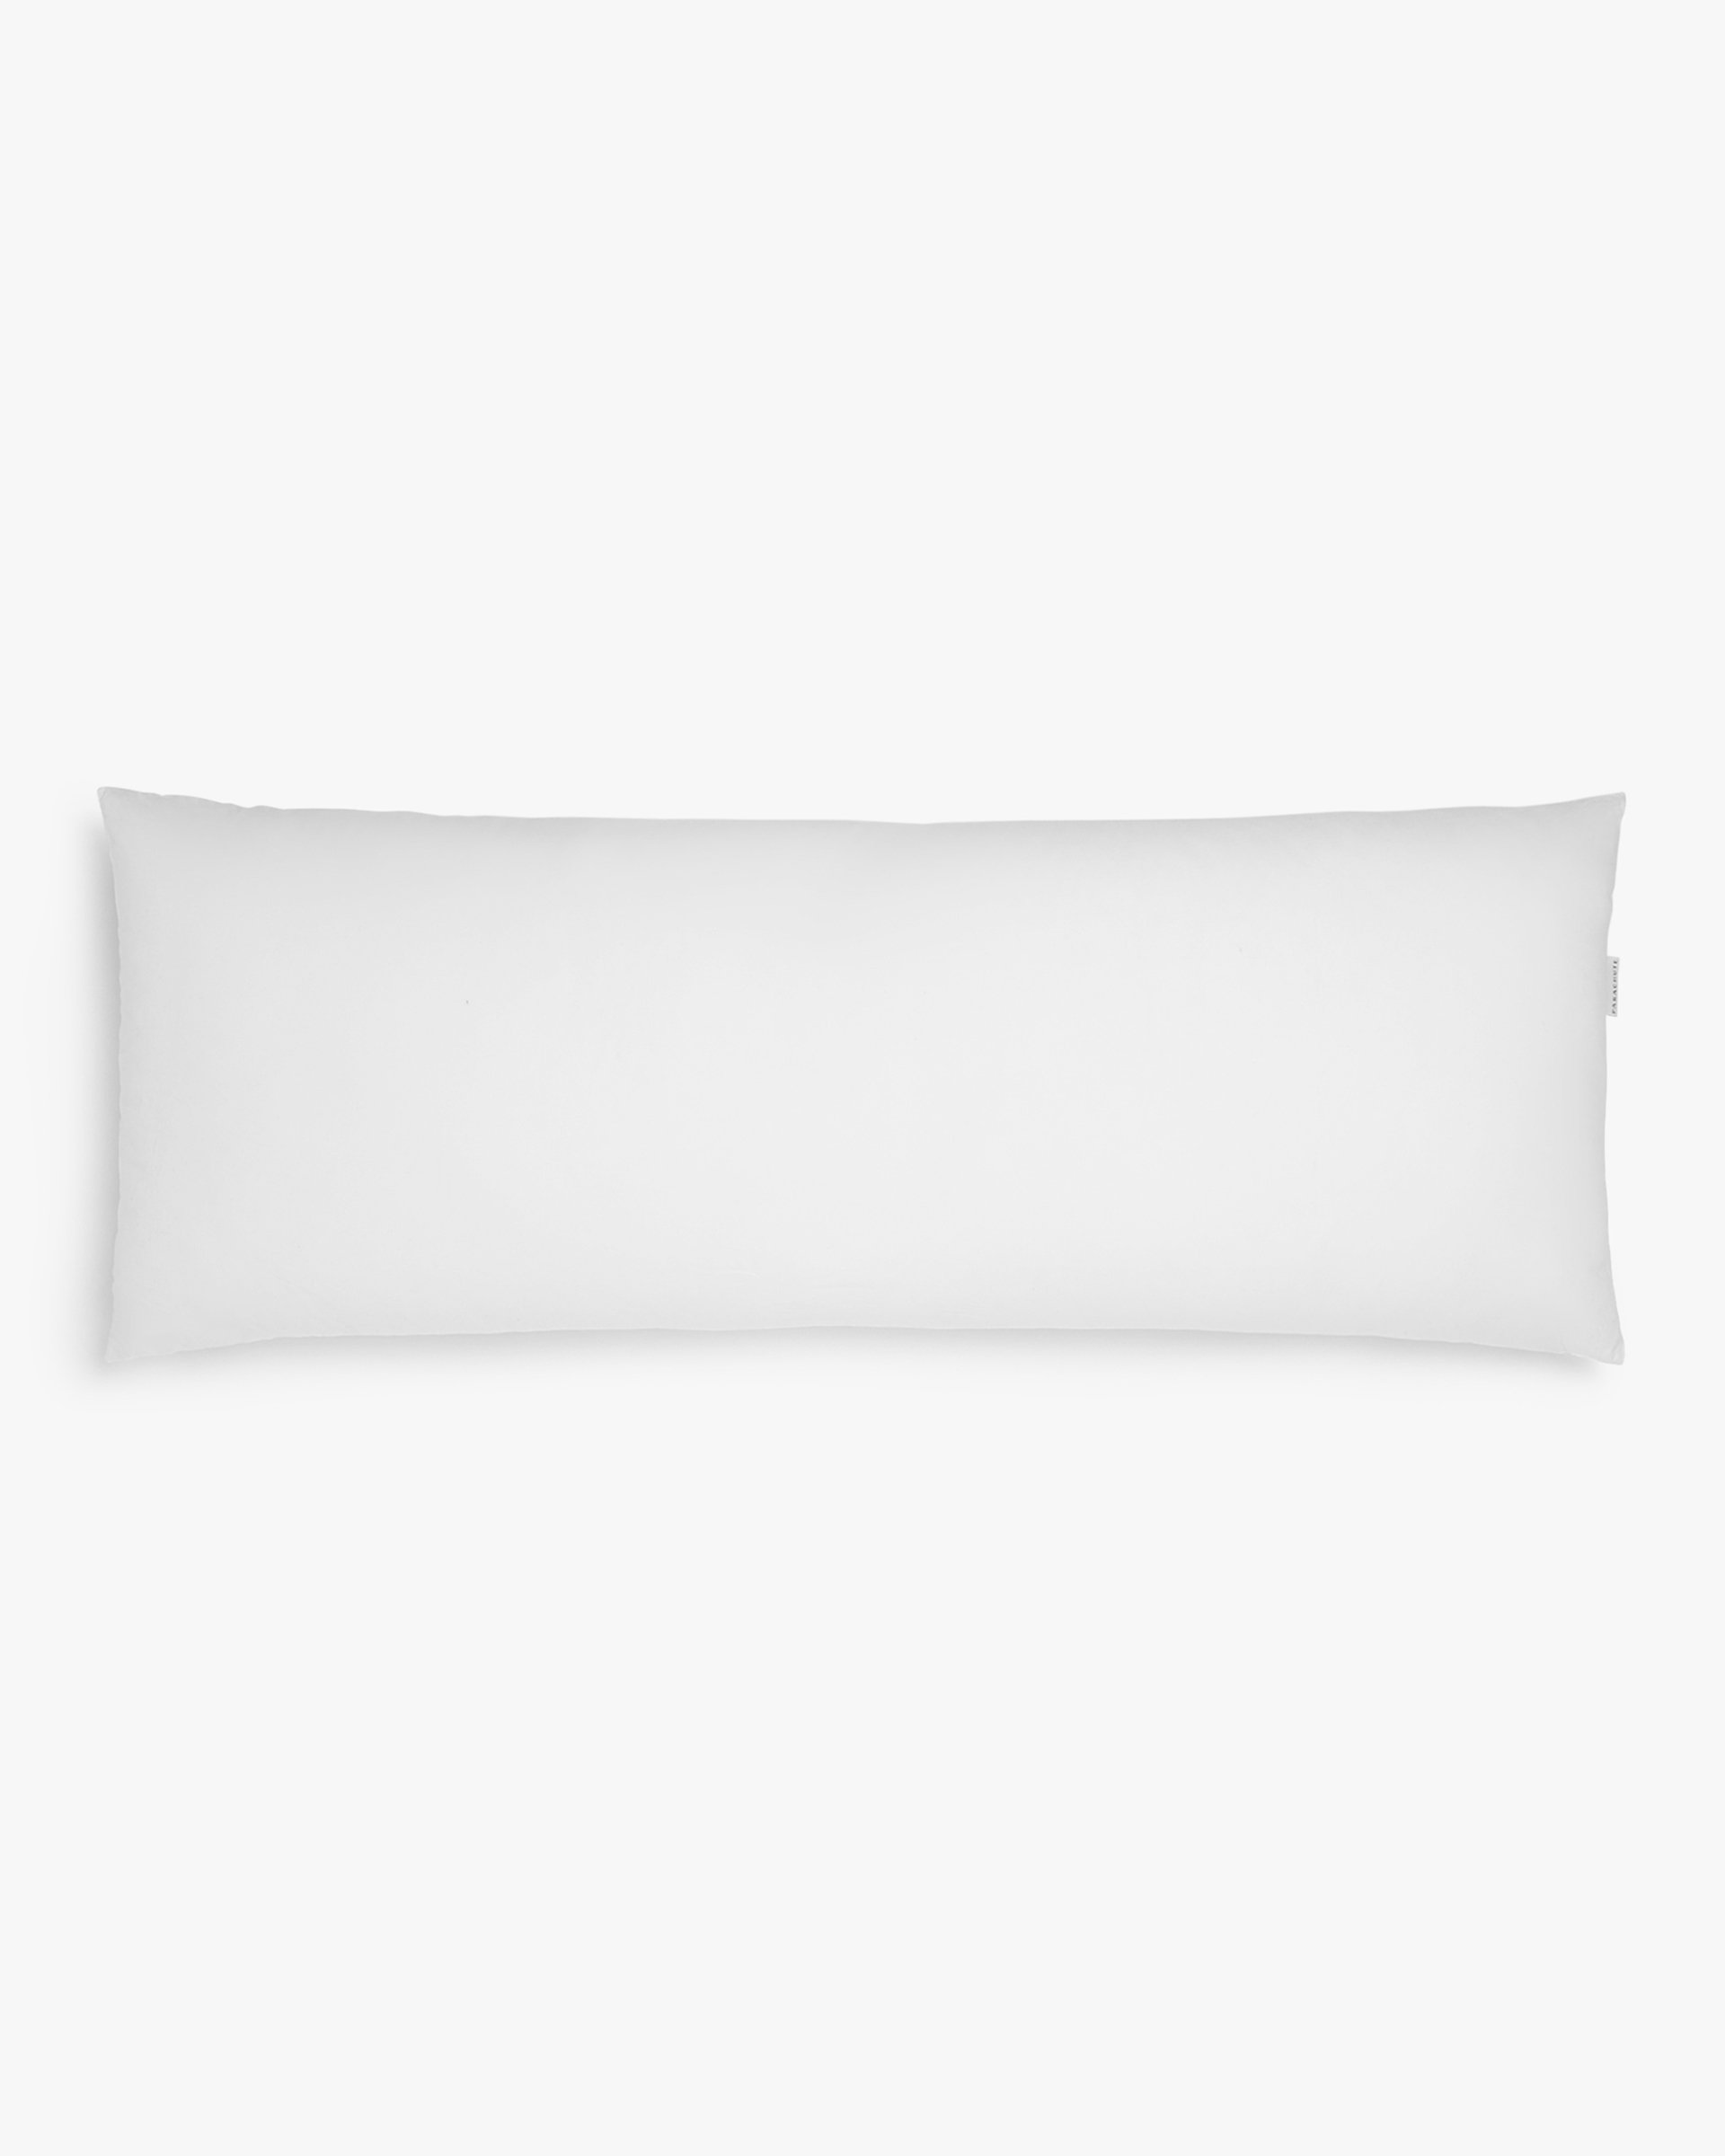 body pillow insert - AREA home